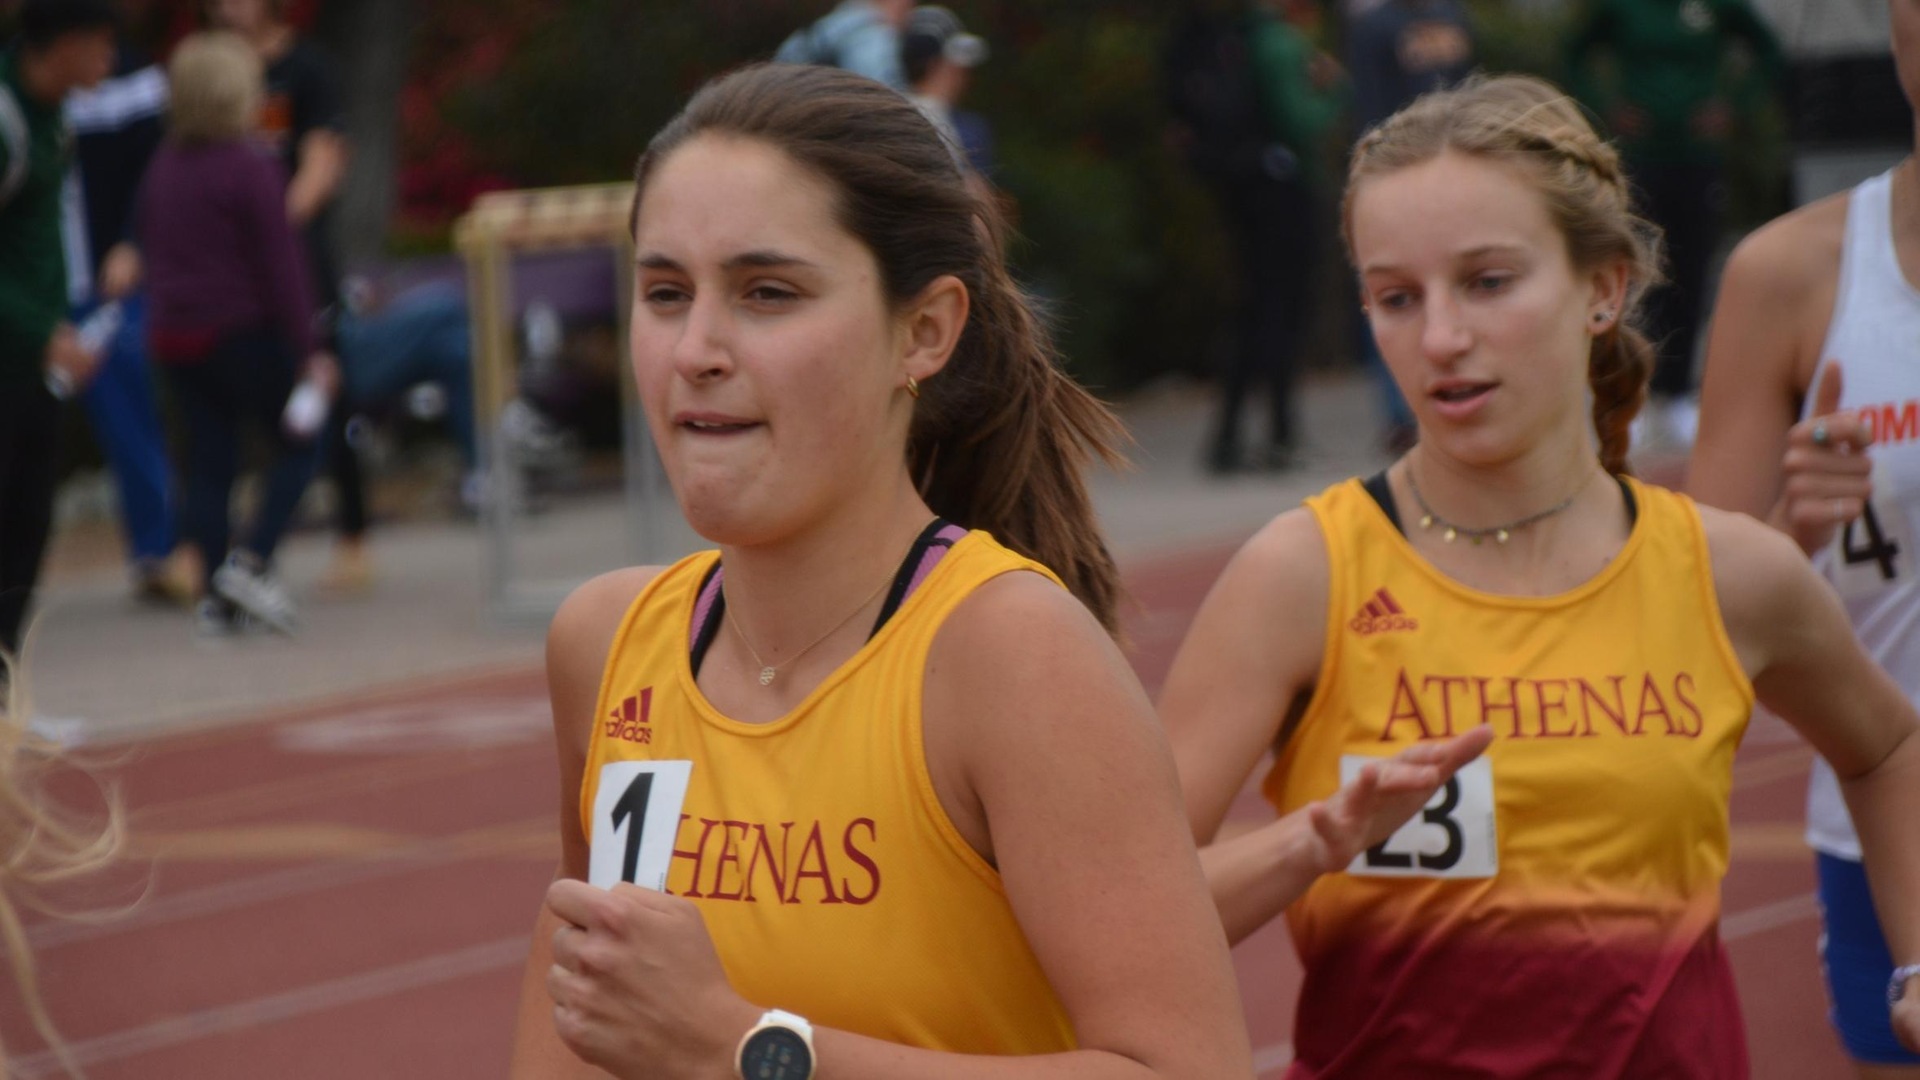 Laura Zimmer now places ninth nationally in the 800